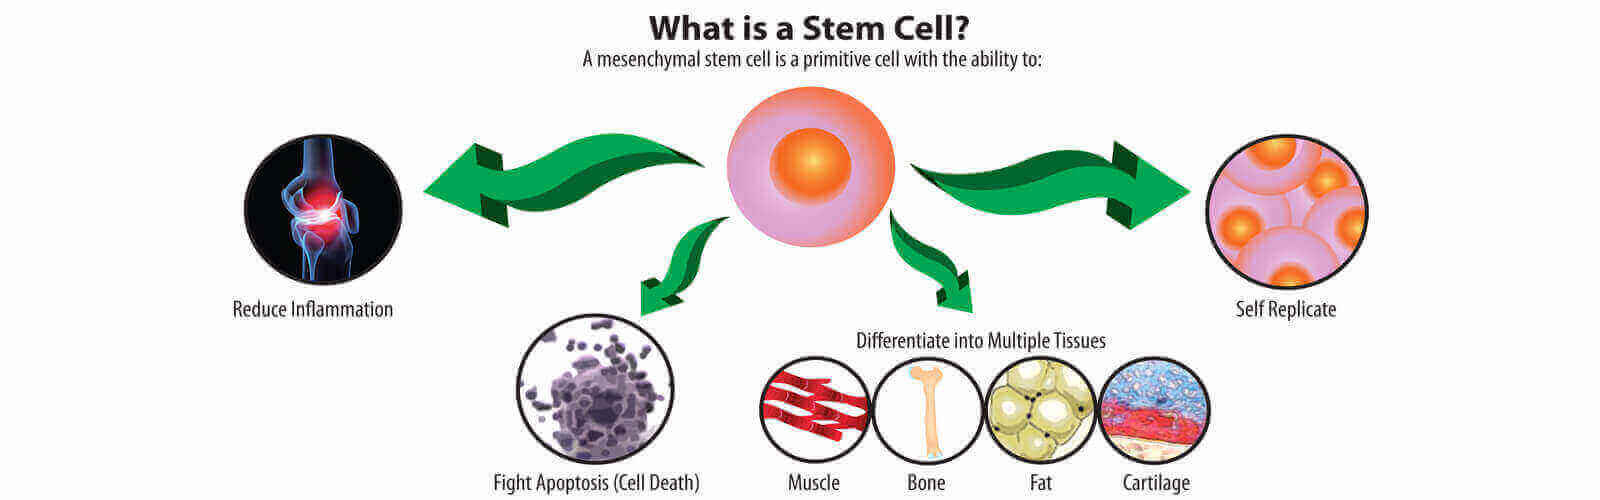 Stem Cell Treatment in Malaysia